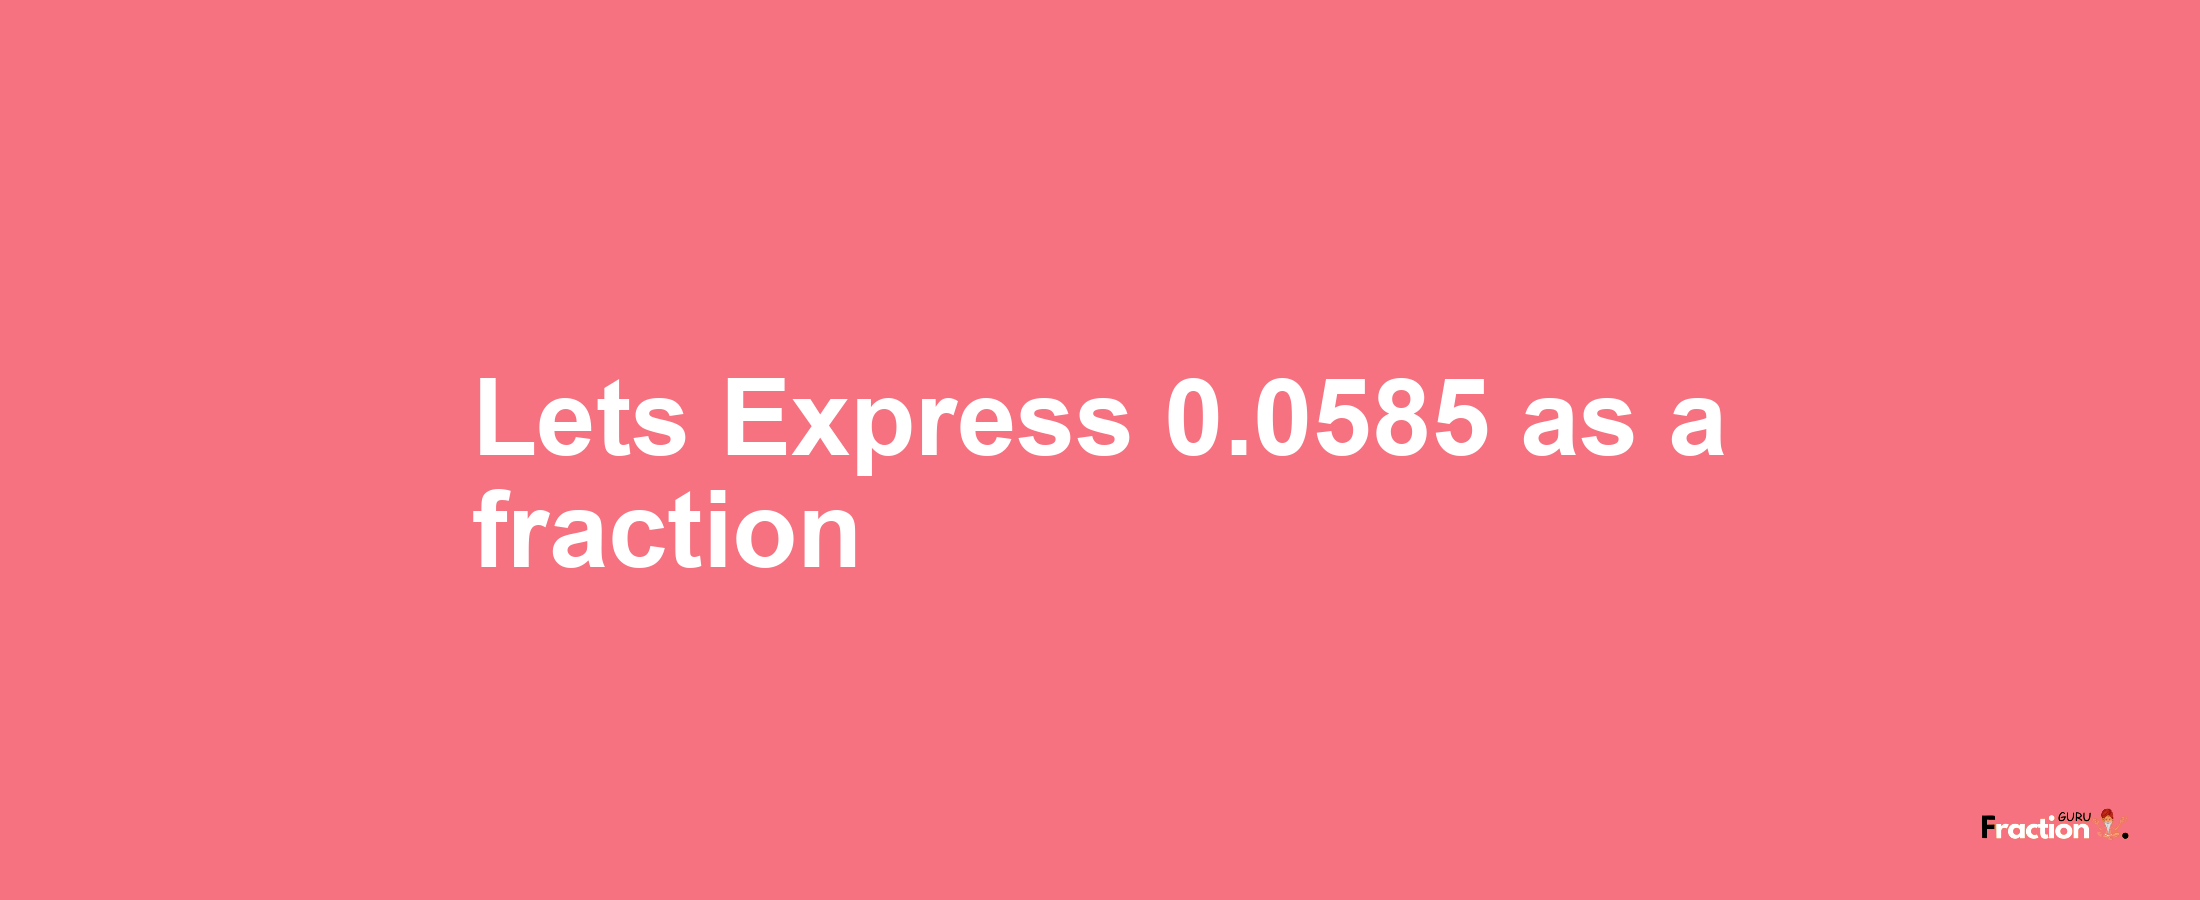 Lets Express 0.0585 as afraction